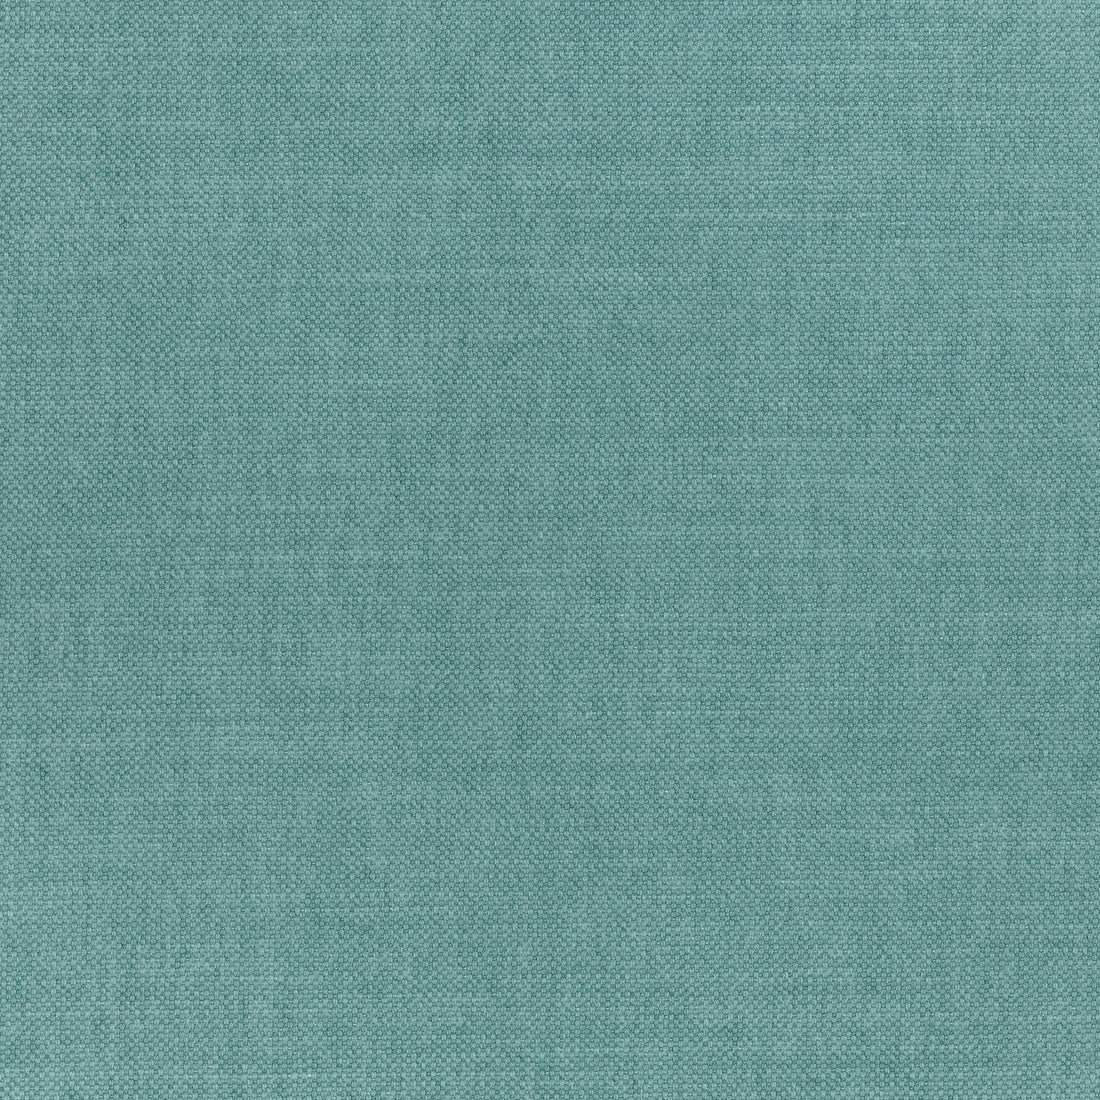 Prisma fabric in capri color - pattern number W70147 - by Thibaut in the Woven Resource Vol 12 Prisma Fabrics collection